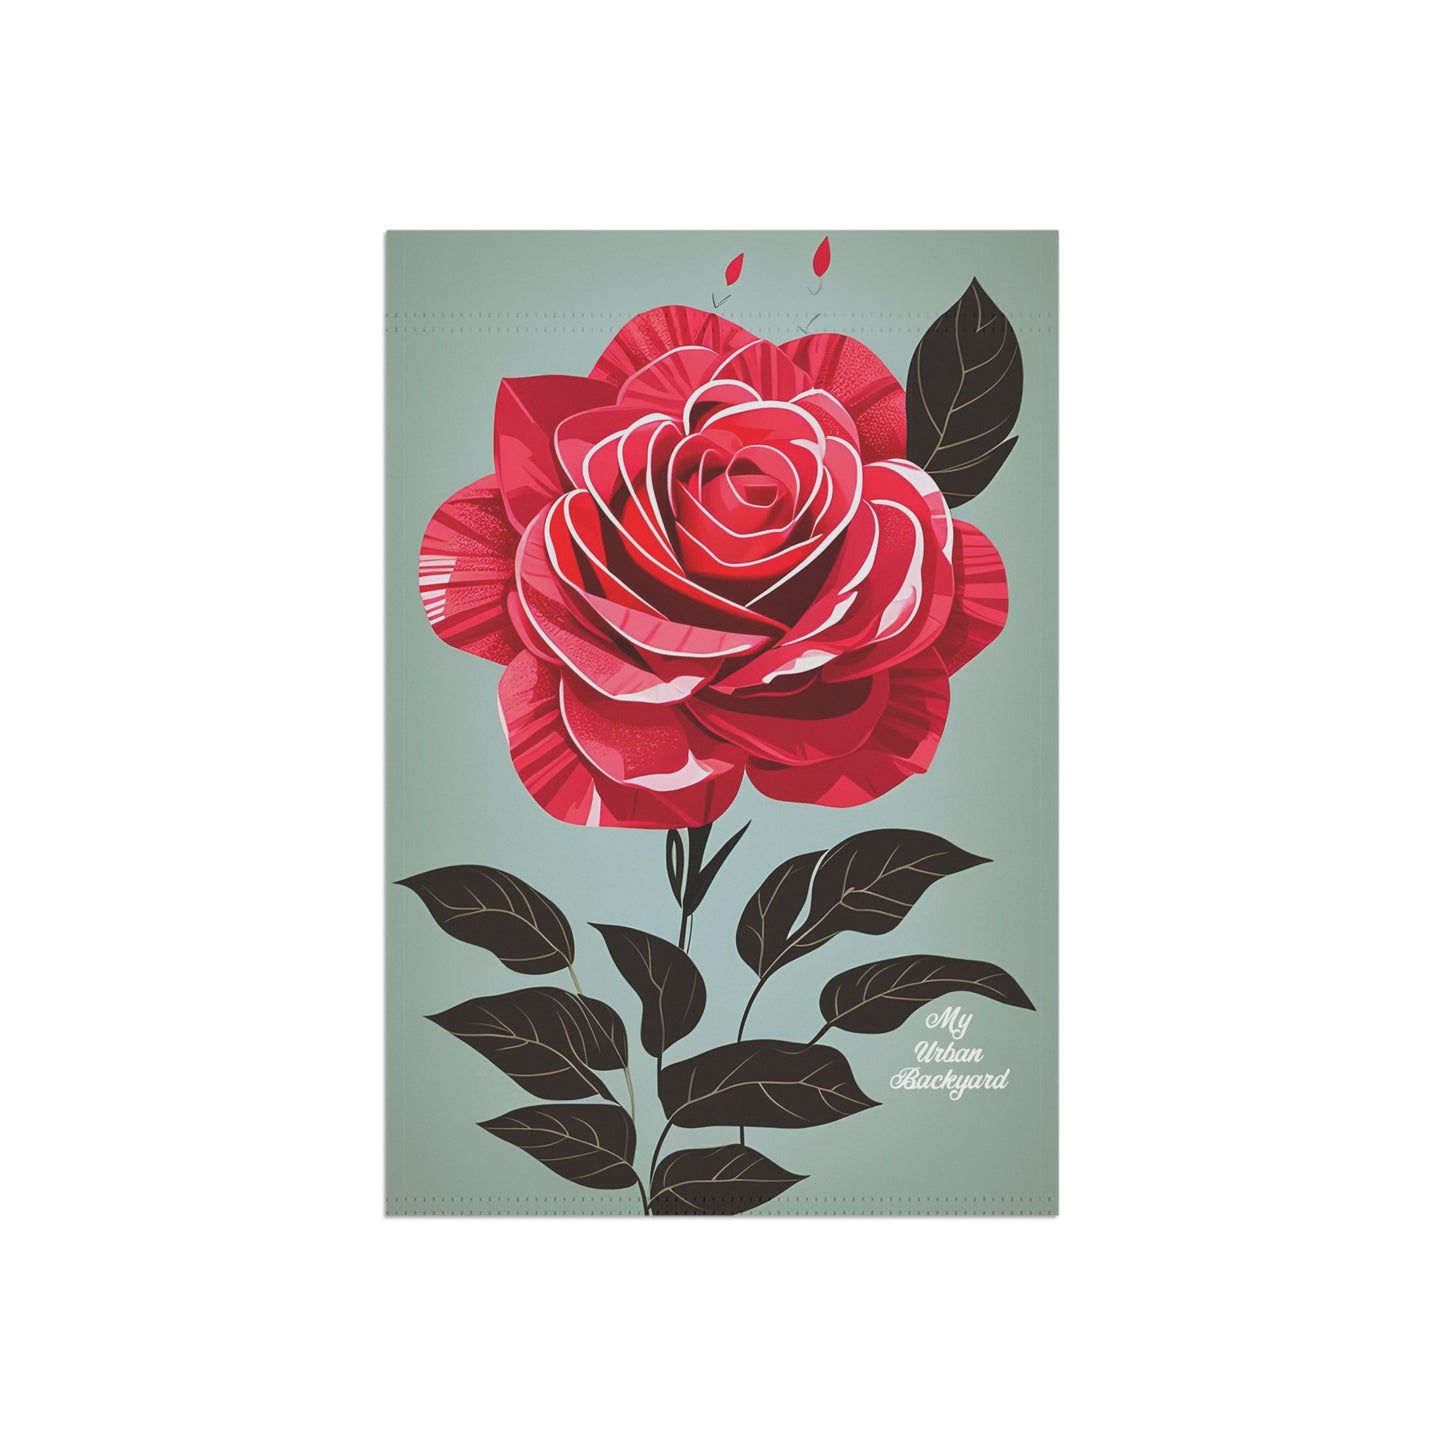 Red Rose Flower, Garden Flag for Yard, Patio, Porch, or Work, 12"x18" - Flag only